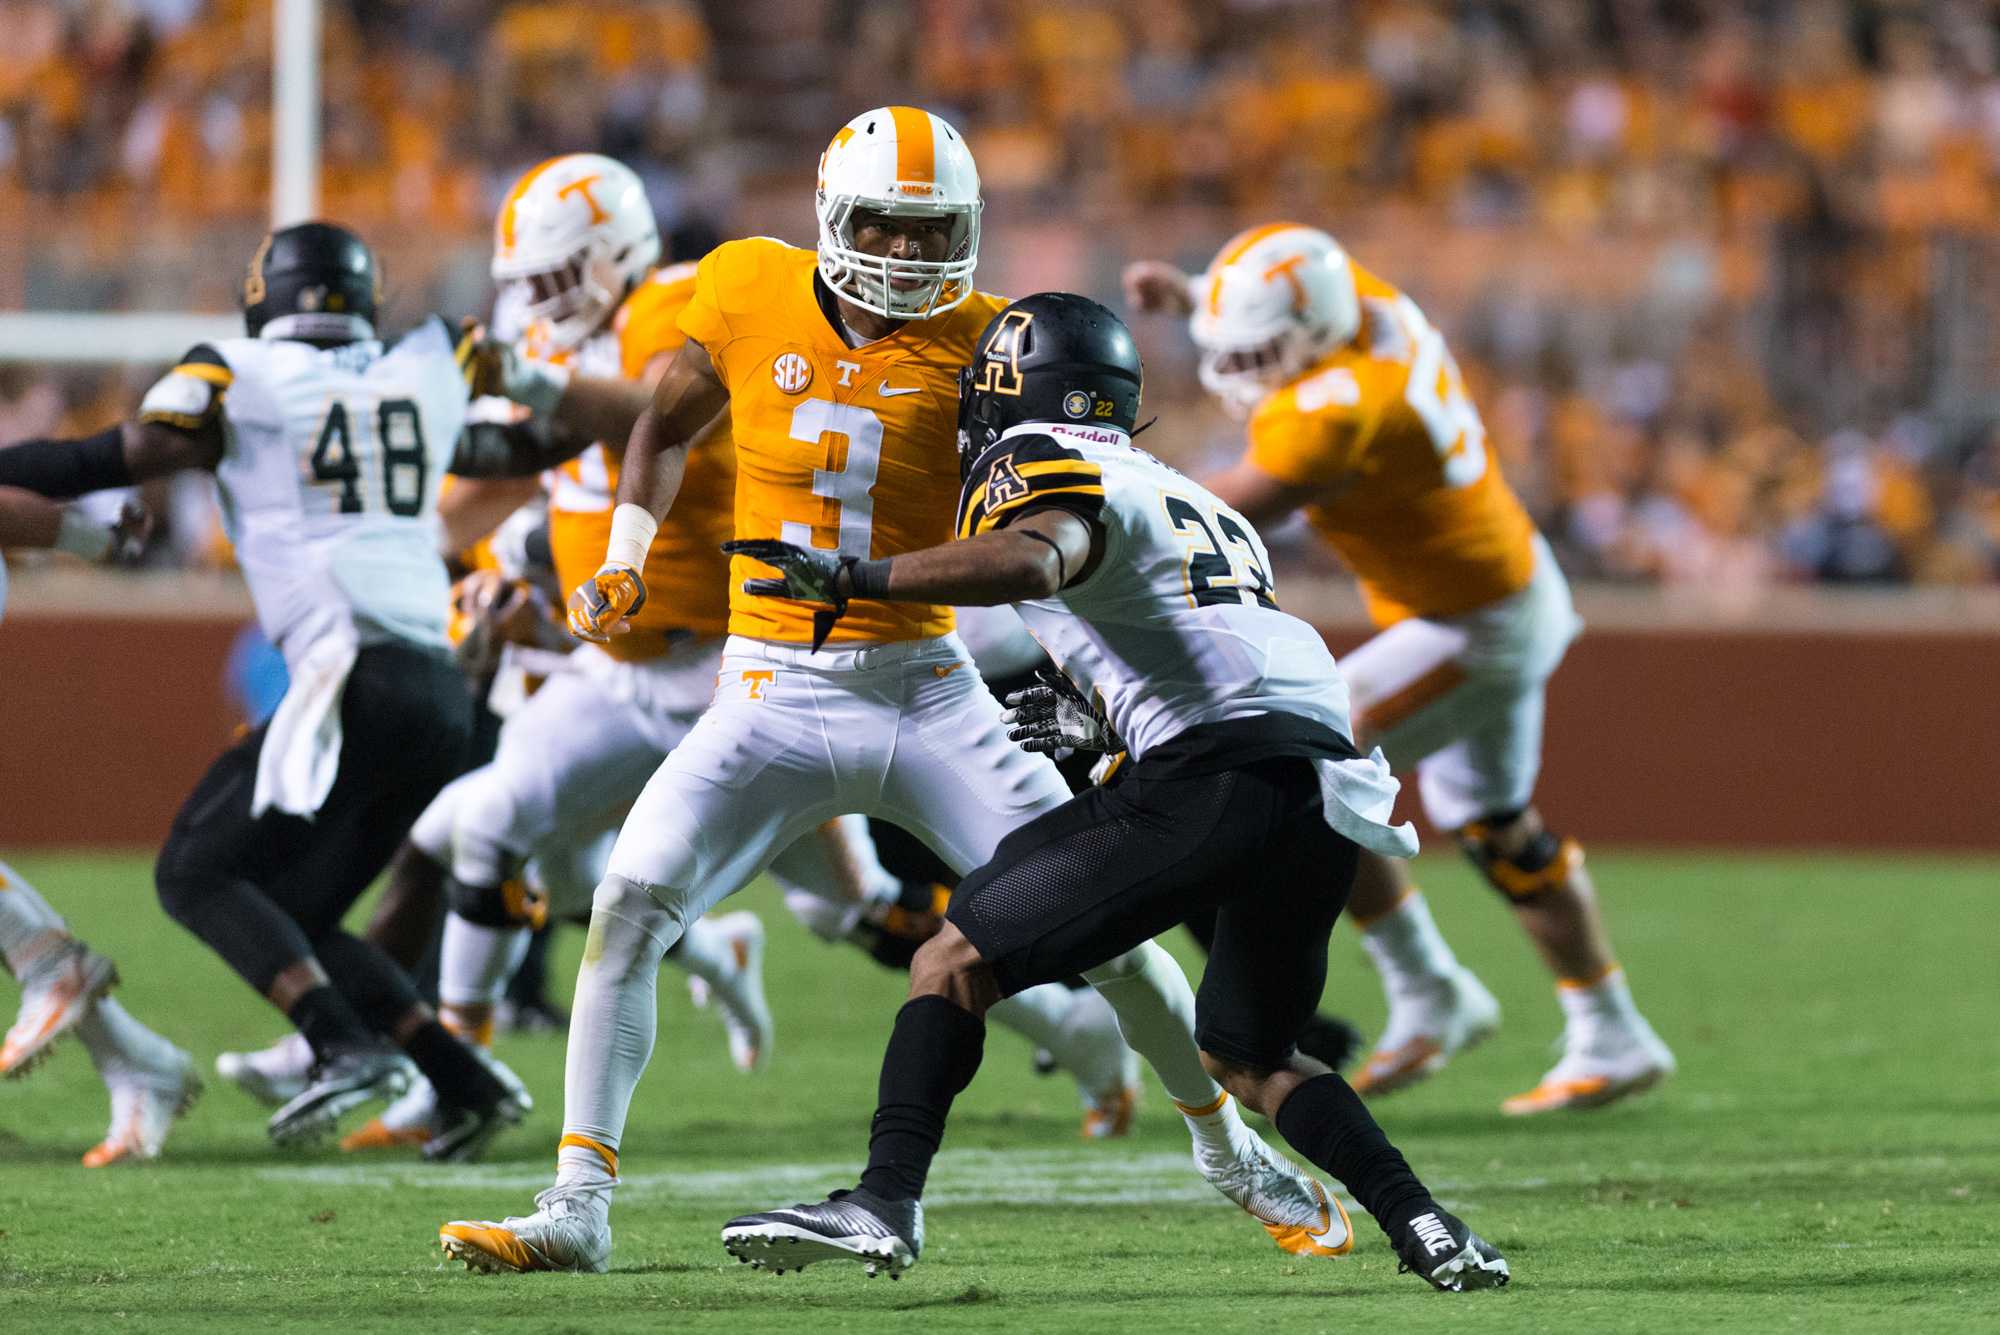 Freshman defensive back Clifton Duck broke up two passes and made four solo tackles against the Vols on September 1.